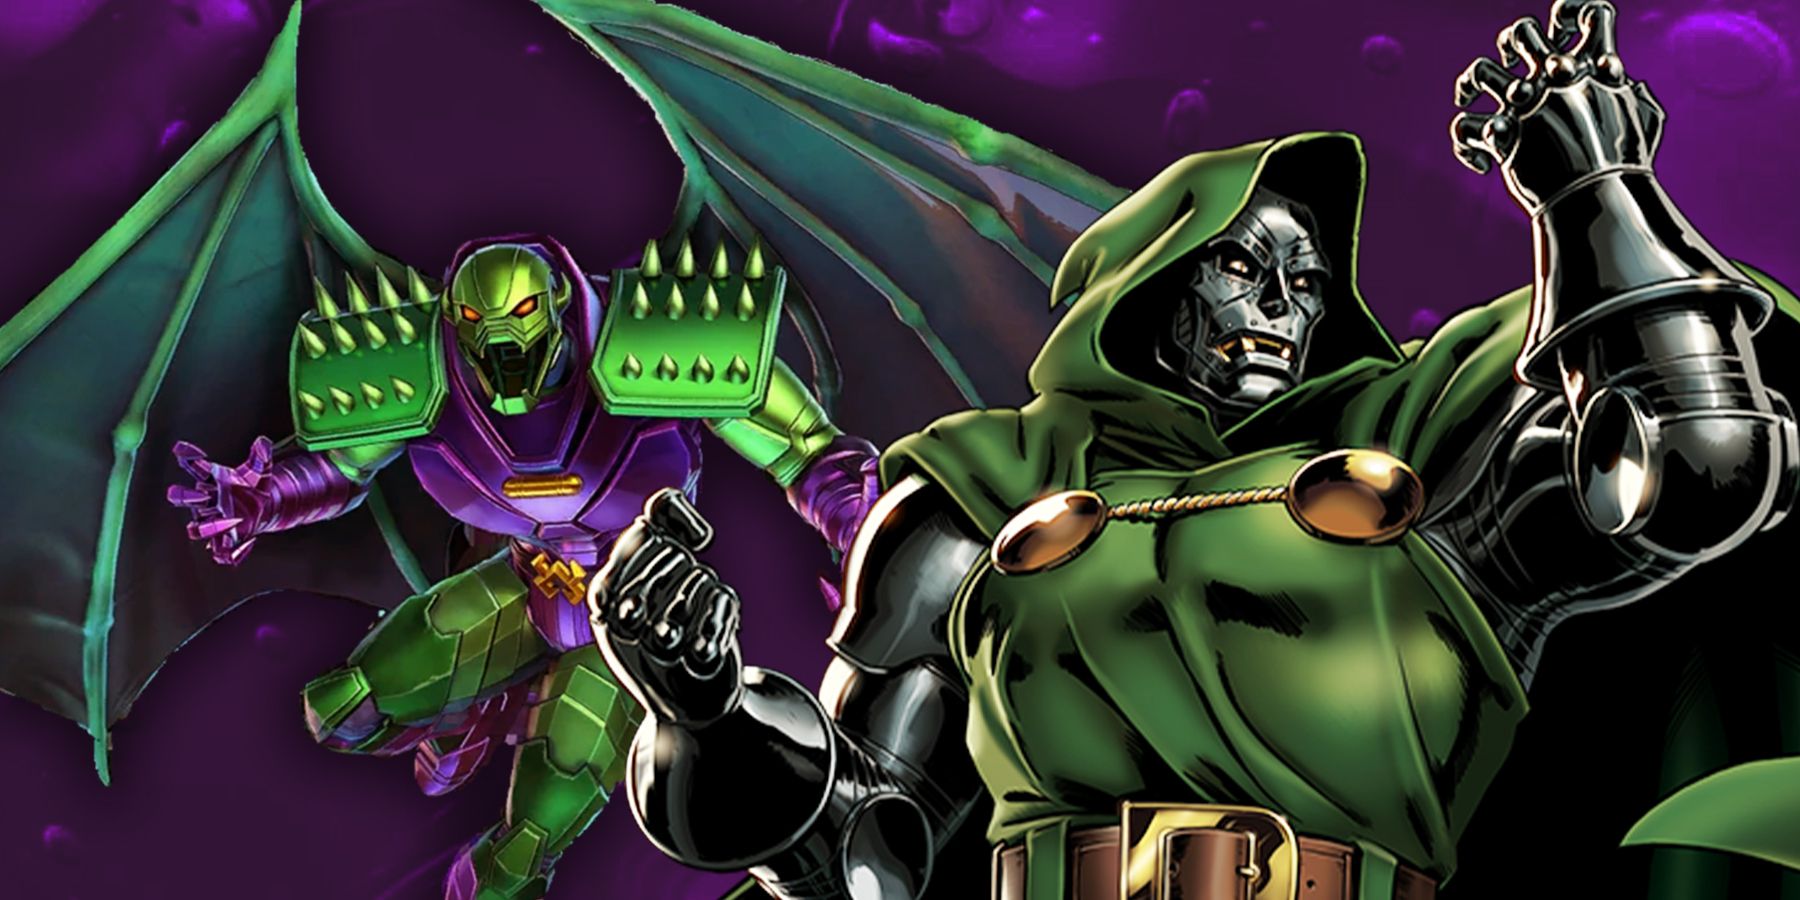 10 Marvel Villains We Hope Are Never Adapted To The Screen